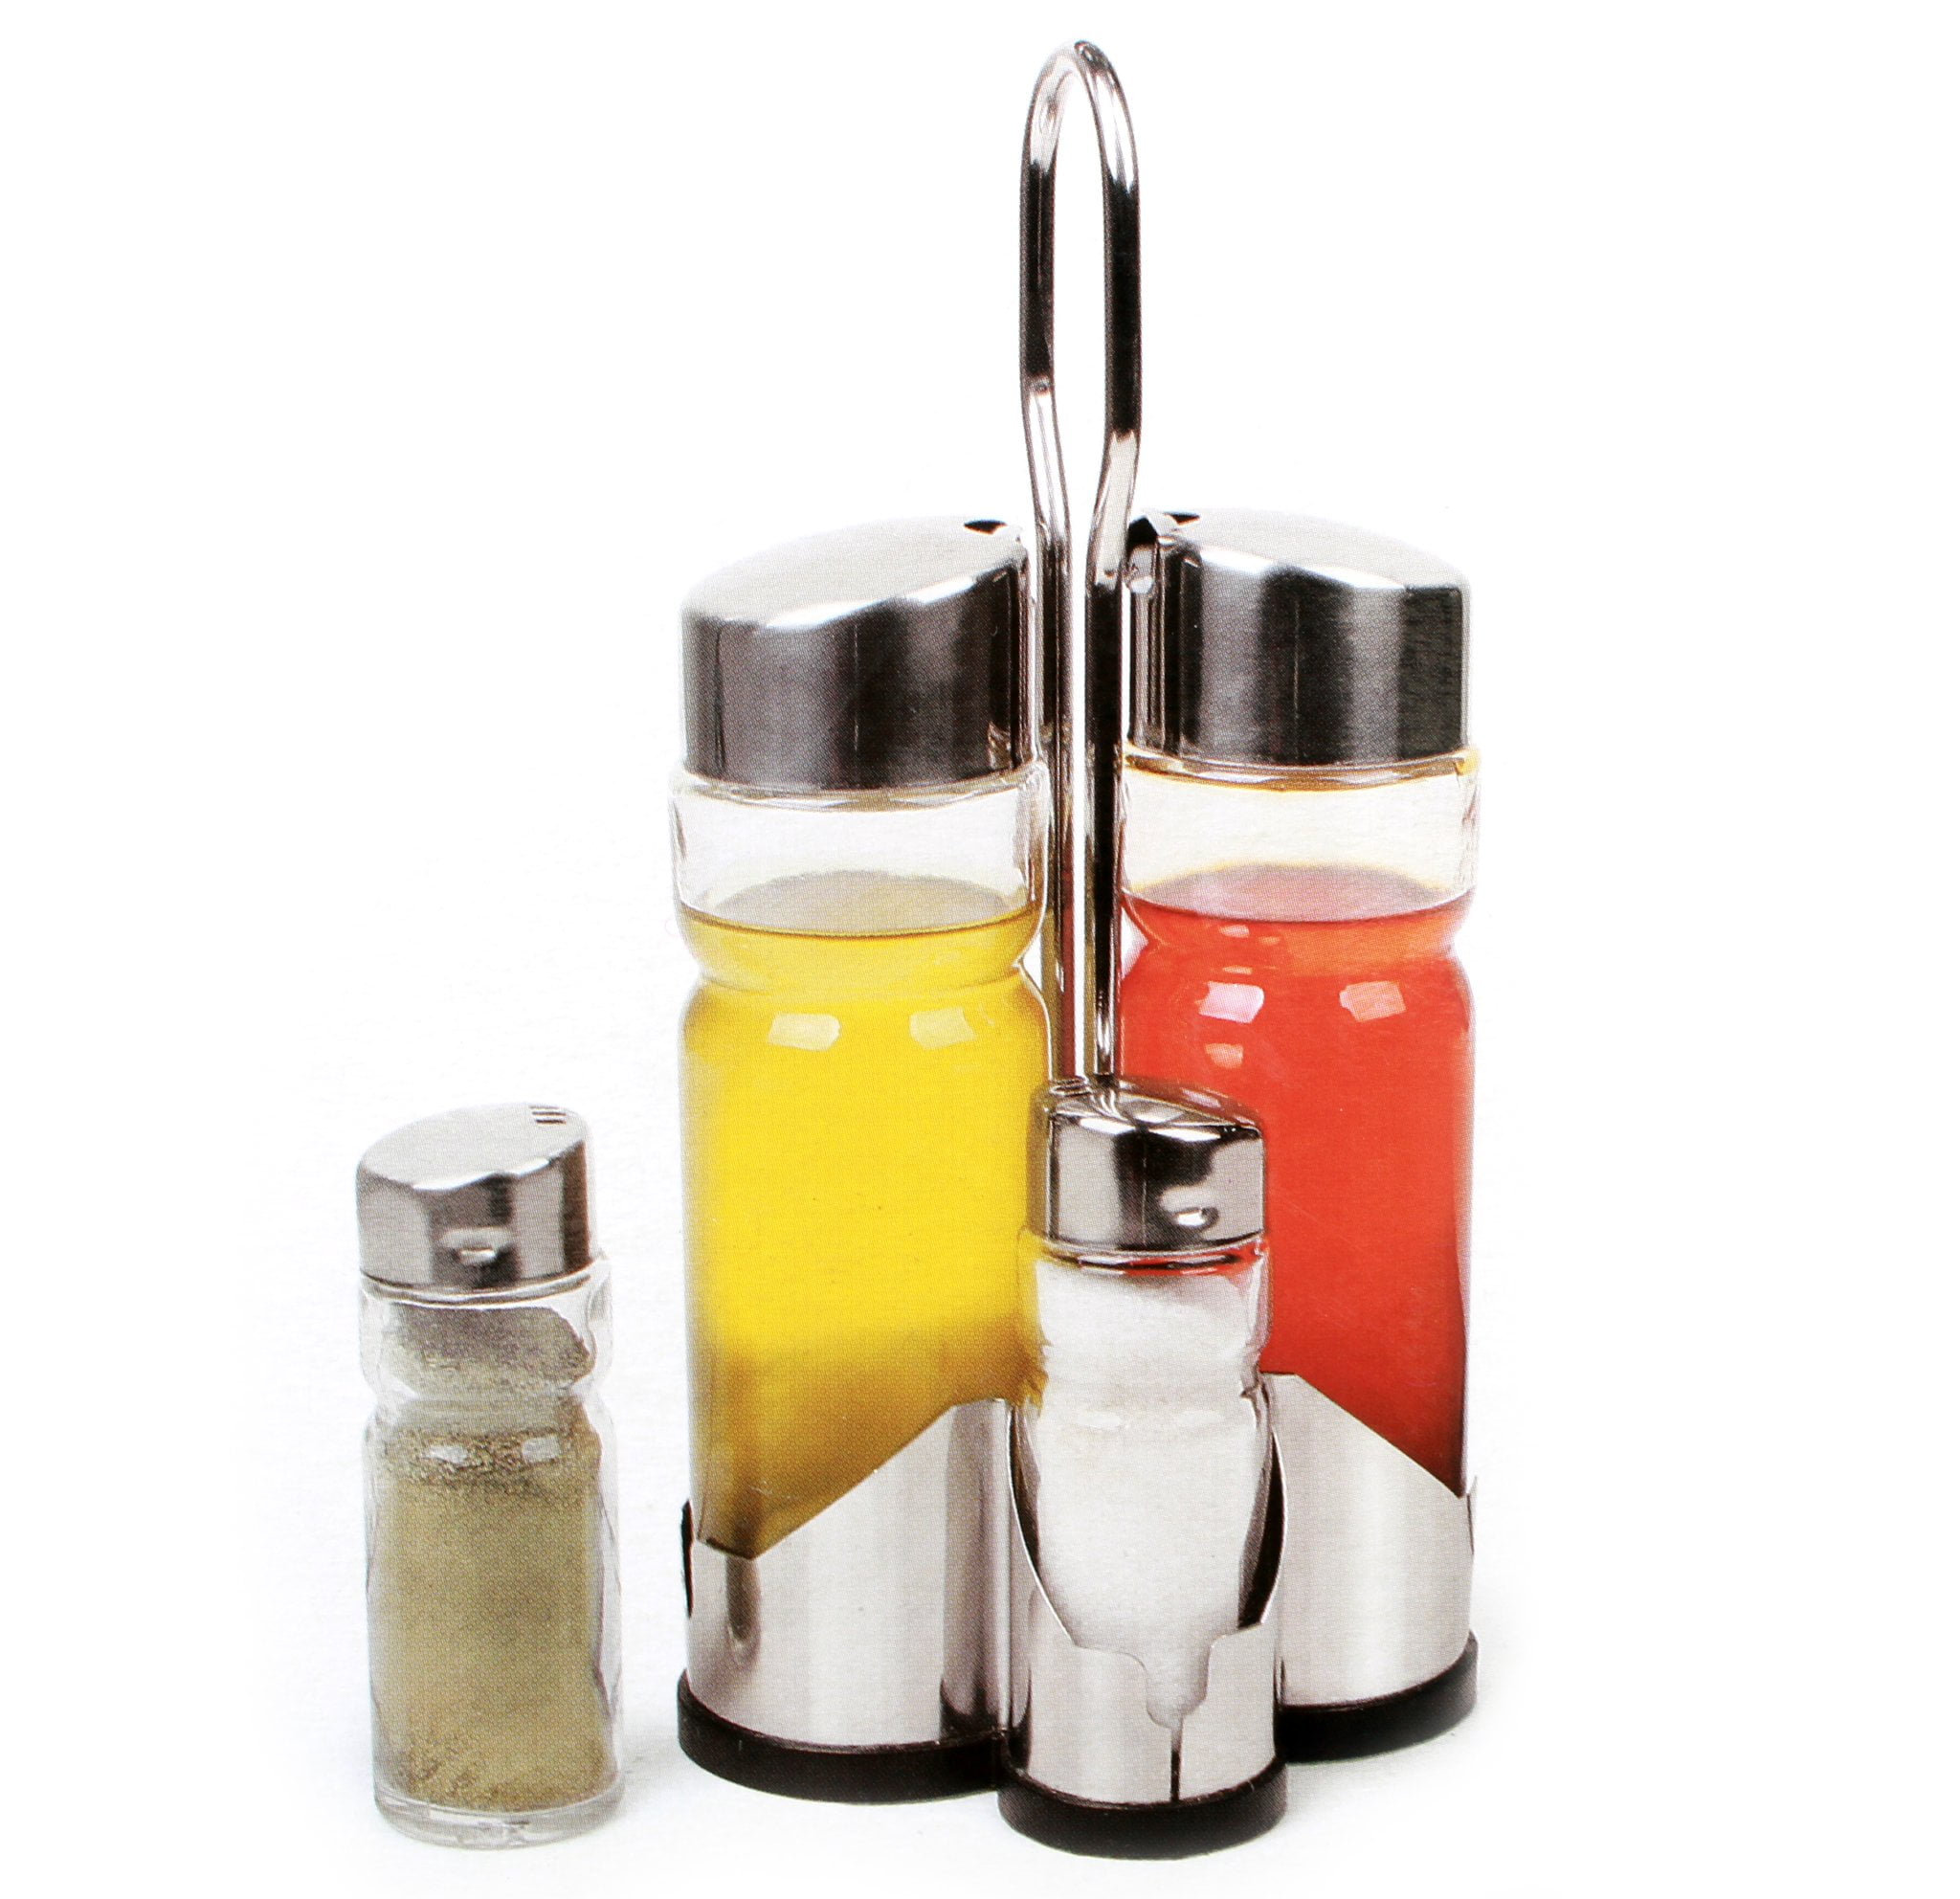 5-Piece Set of Olive Oil and Vinegar Dispenser Bottles Matching Salt and Pepper Shakers for Home and Kitchen Stainless Steel Drip Free, 280ml & 90ml 